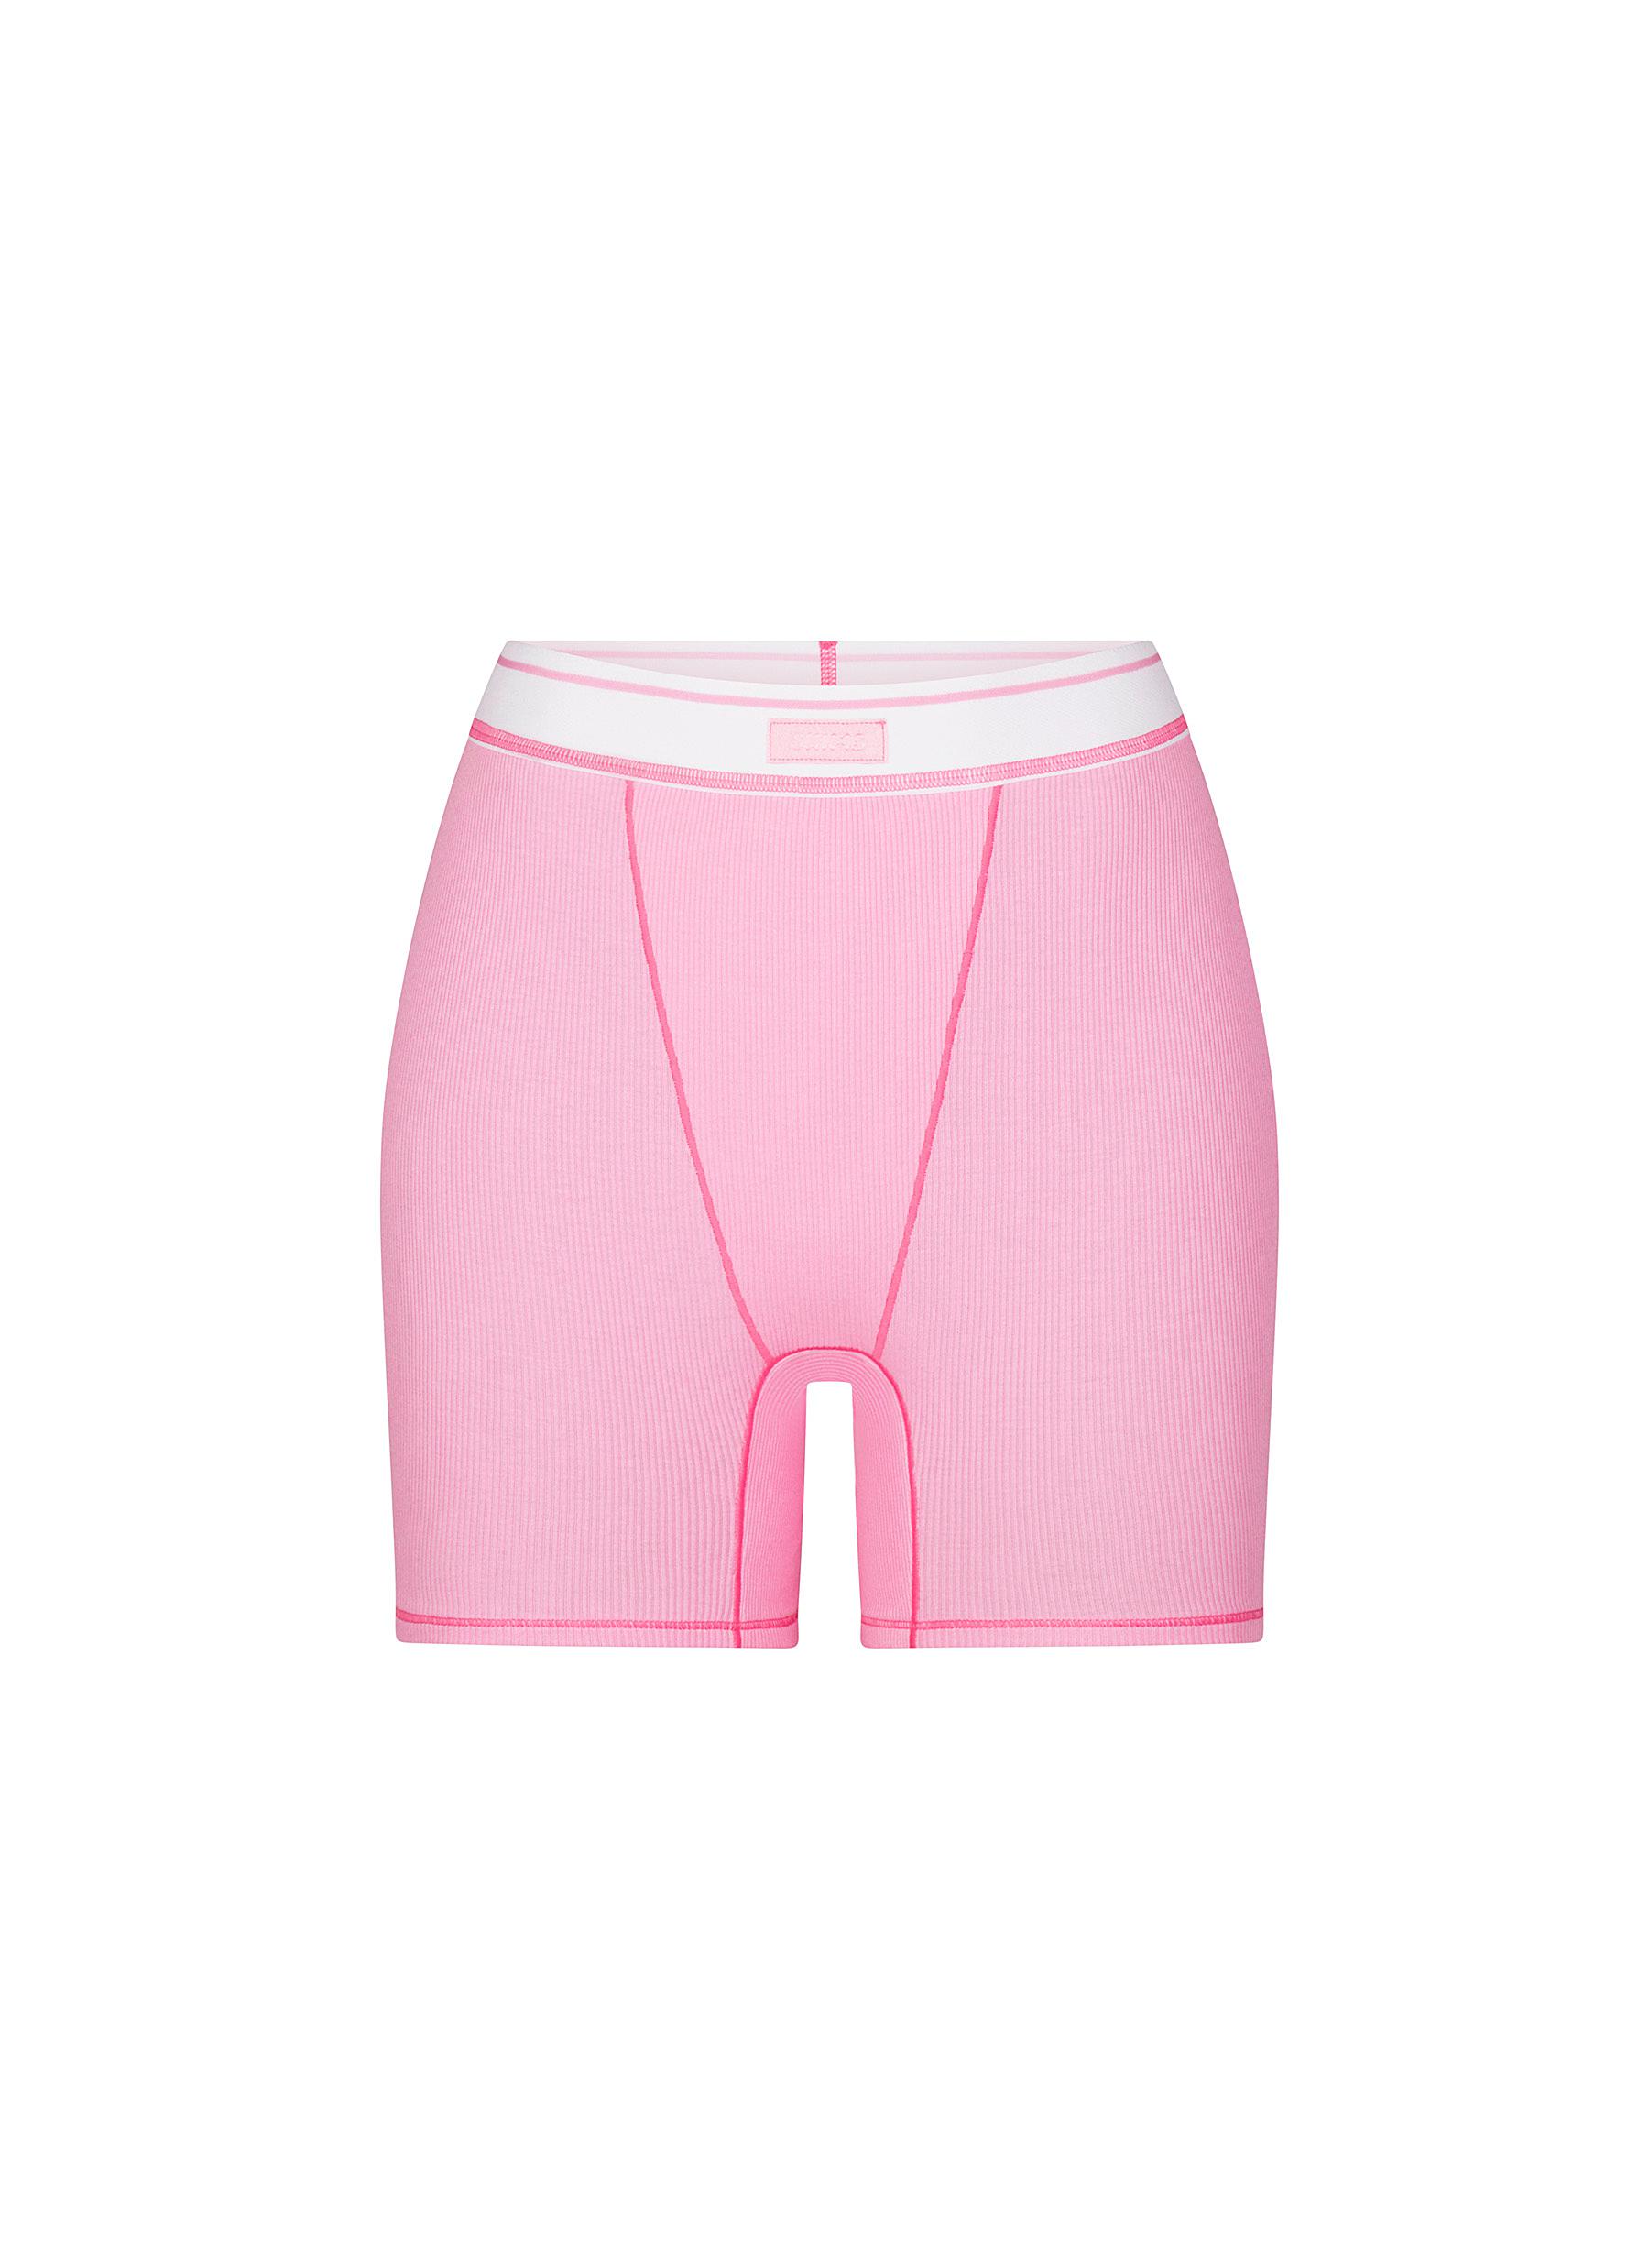 Women's Signature Boxer Brief - Pink/White - GWBB CLOTHING